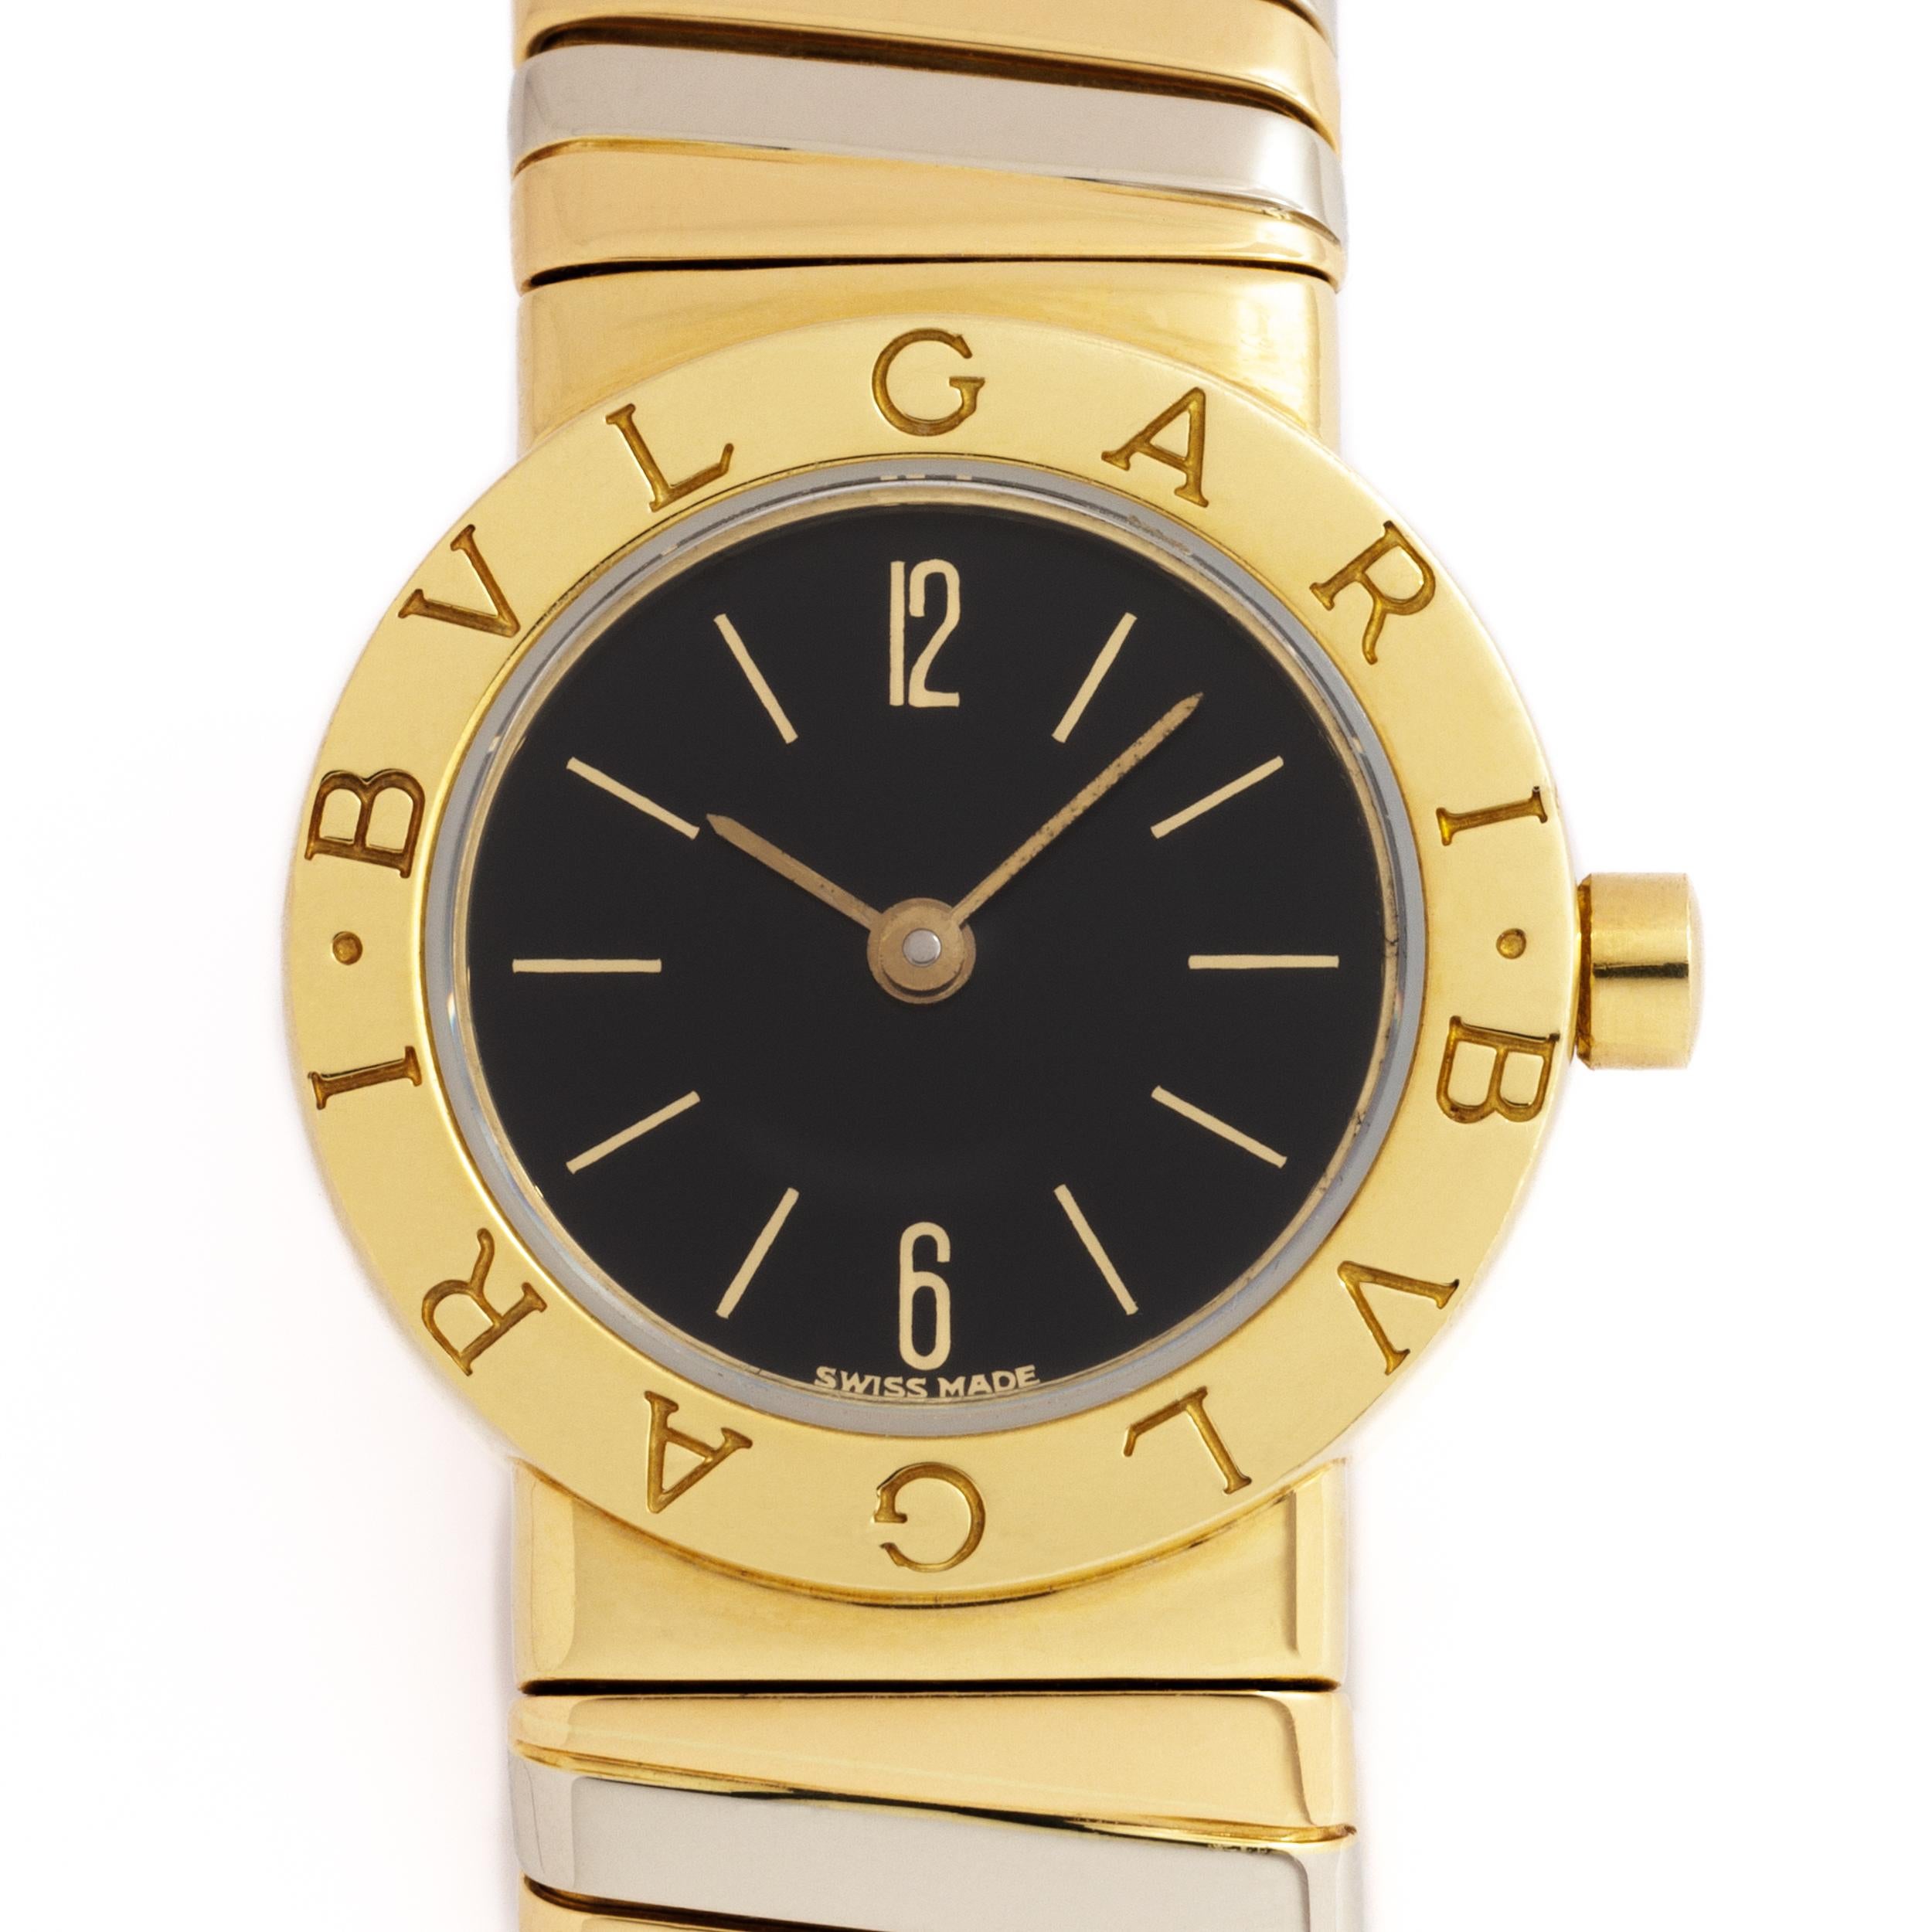 Bulgari Bvlgari 18 Karat Tri-Color Gold Model BB232T 23mm Tubogas Watch In Good Condition For Sale In New York, NY